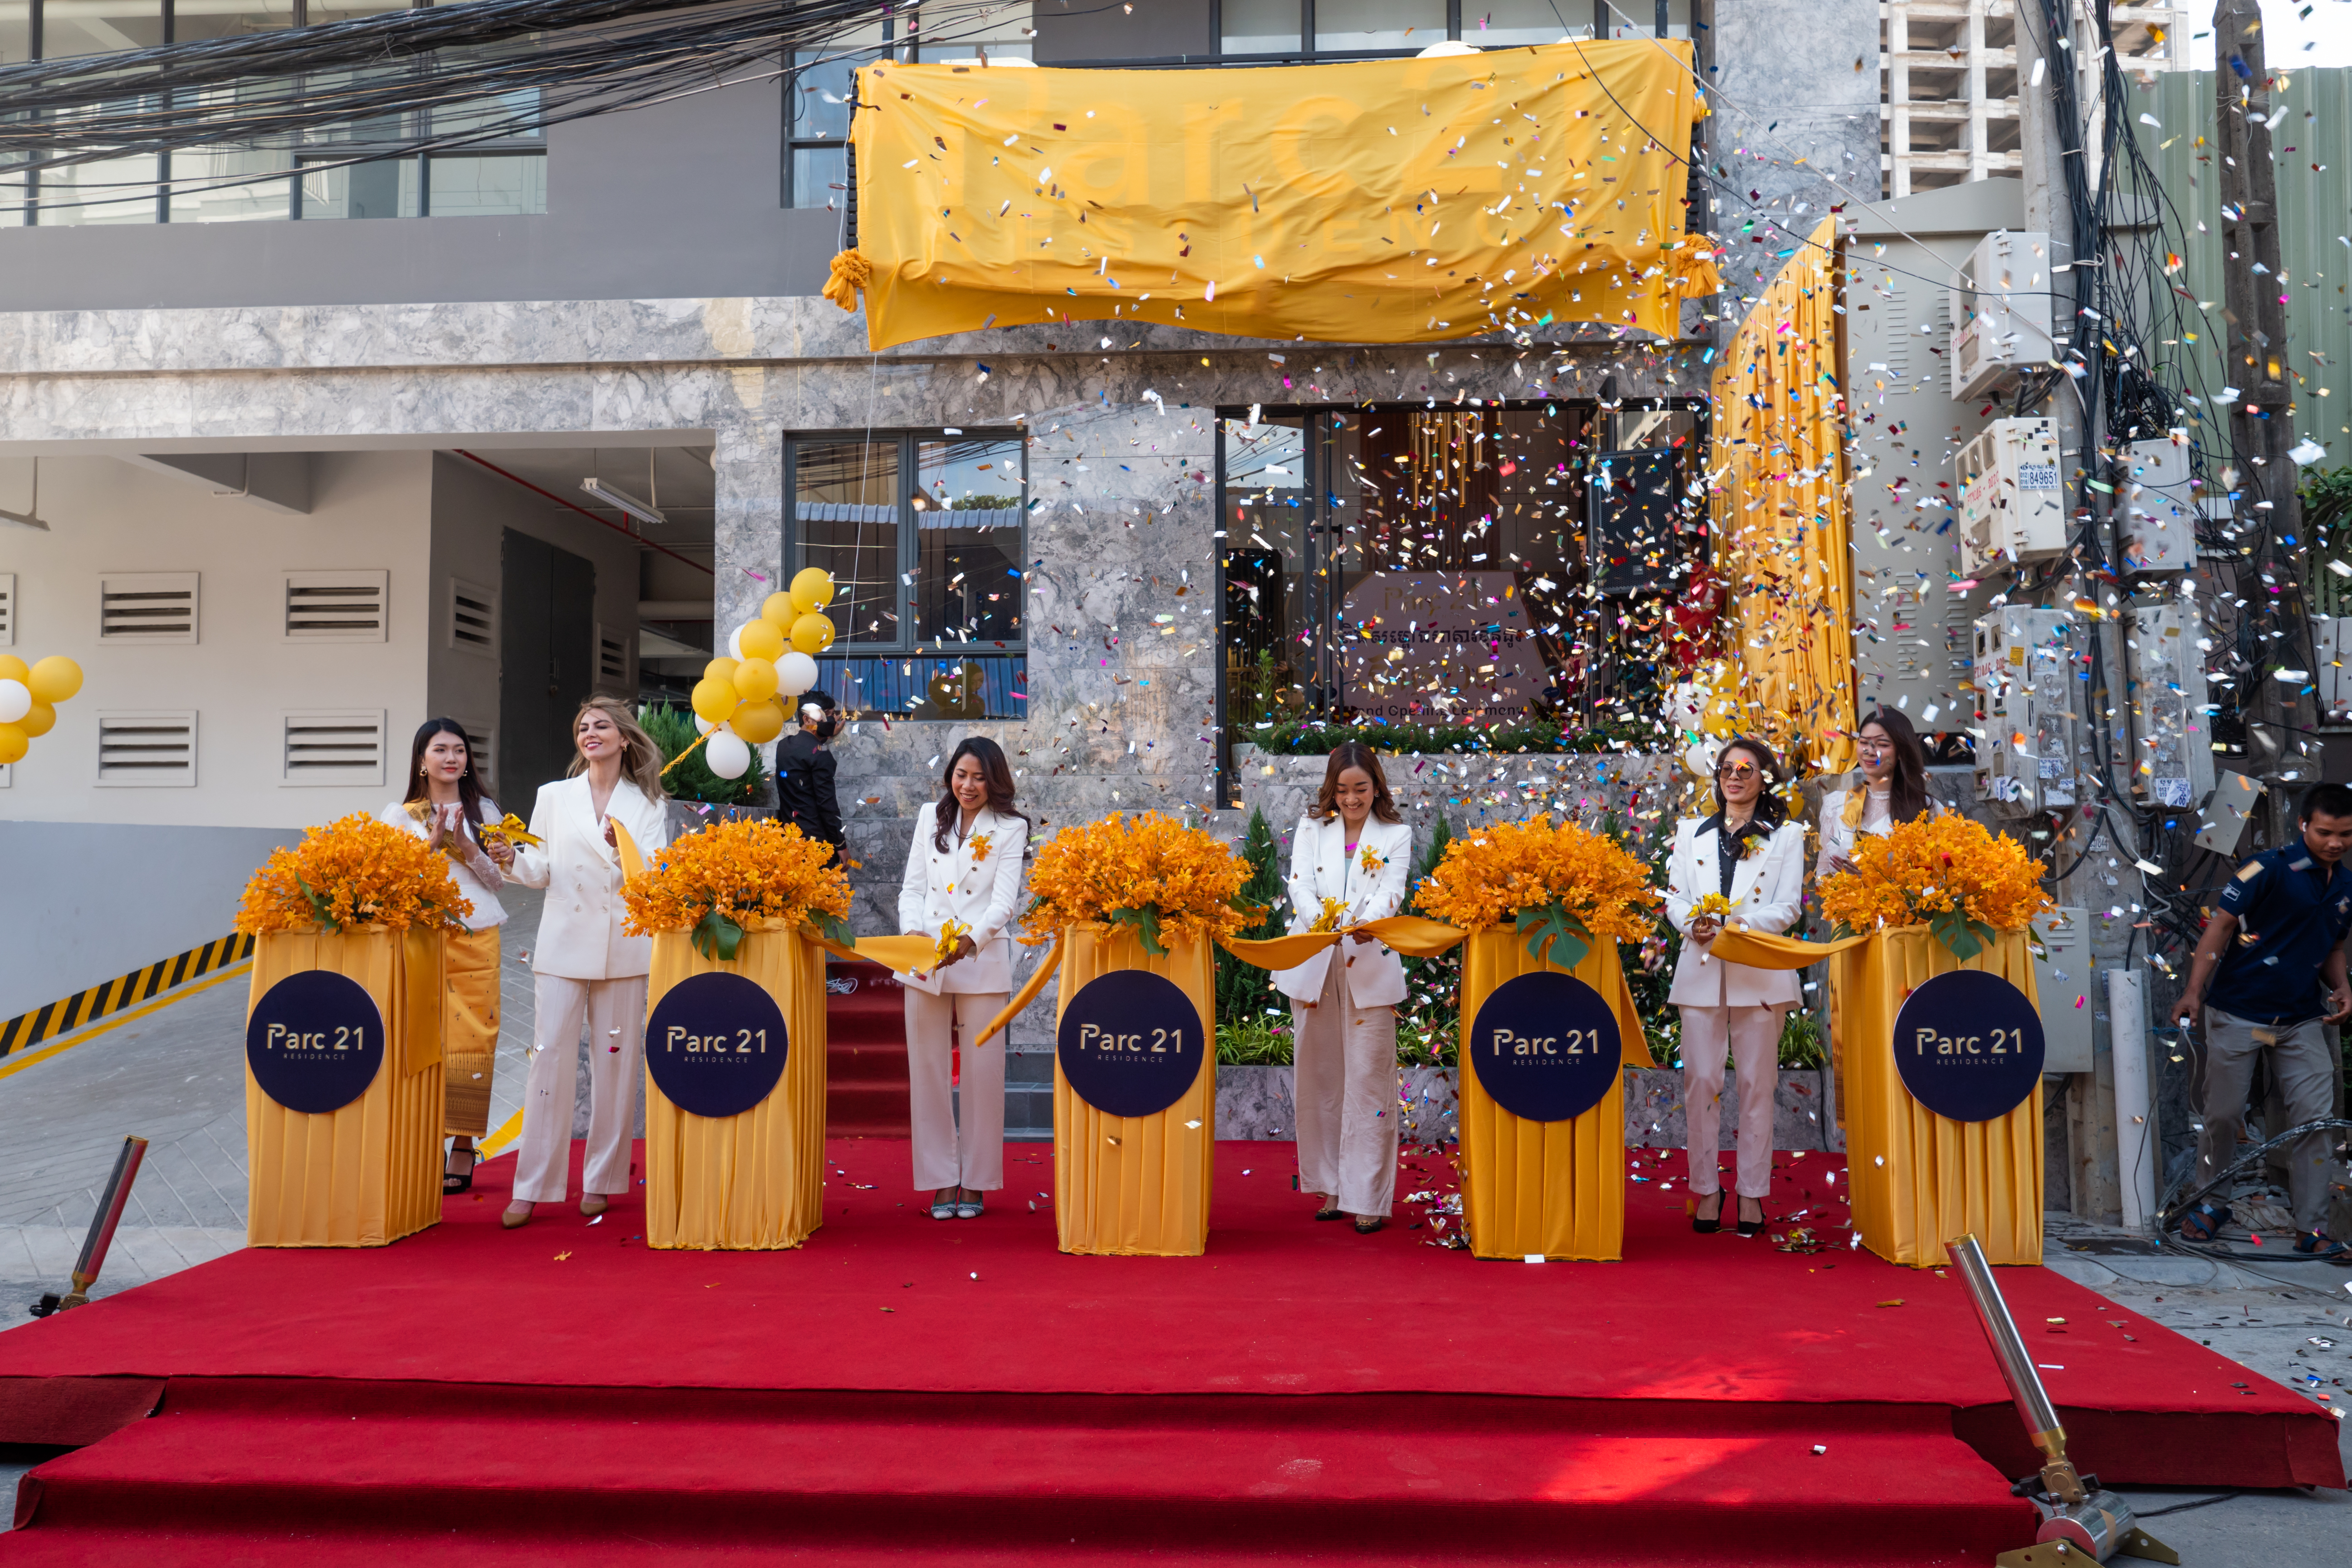 Parc 21 Residence celebrates its Grand Opening